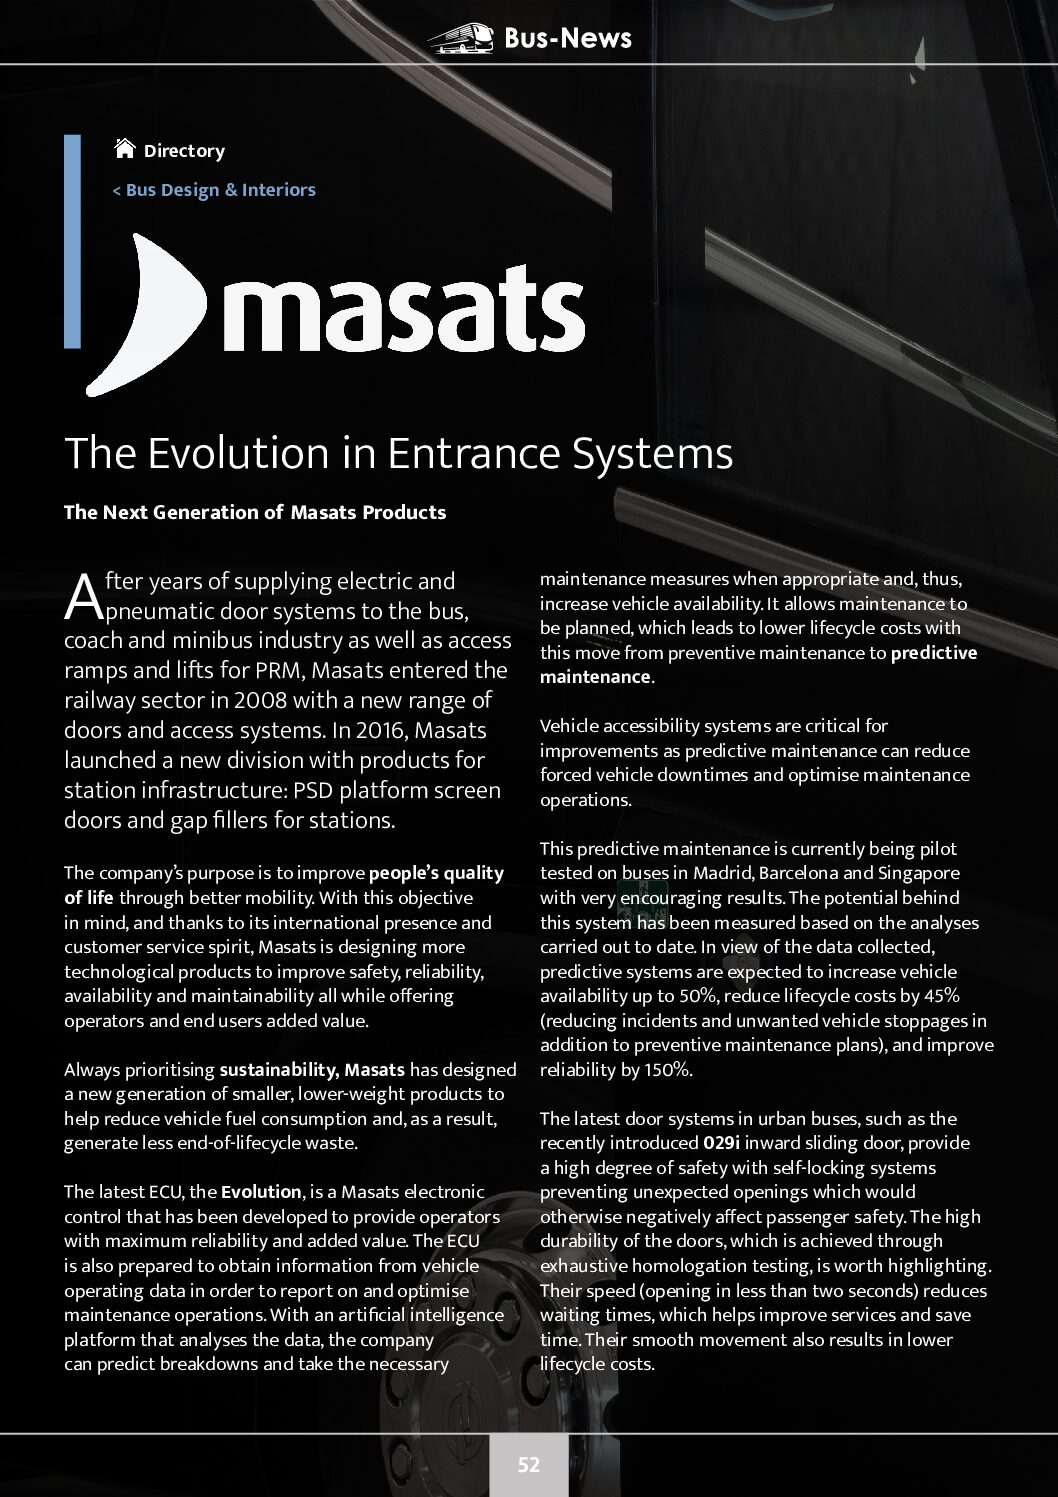 The Evolution in Entrance Systems